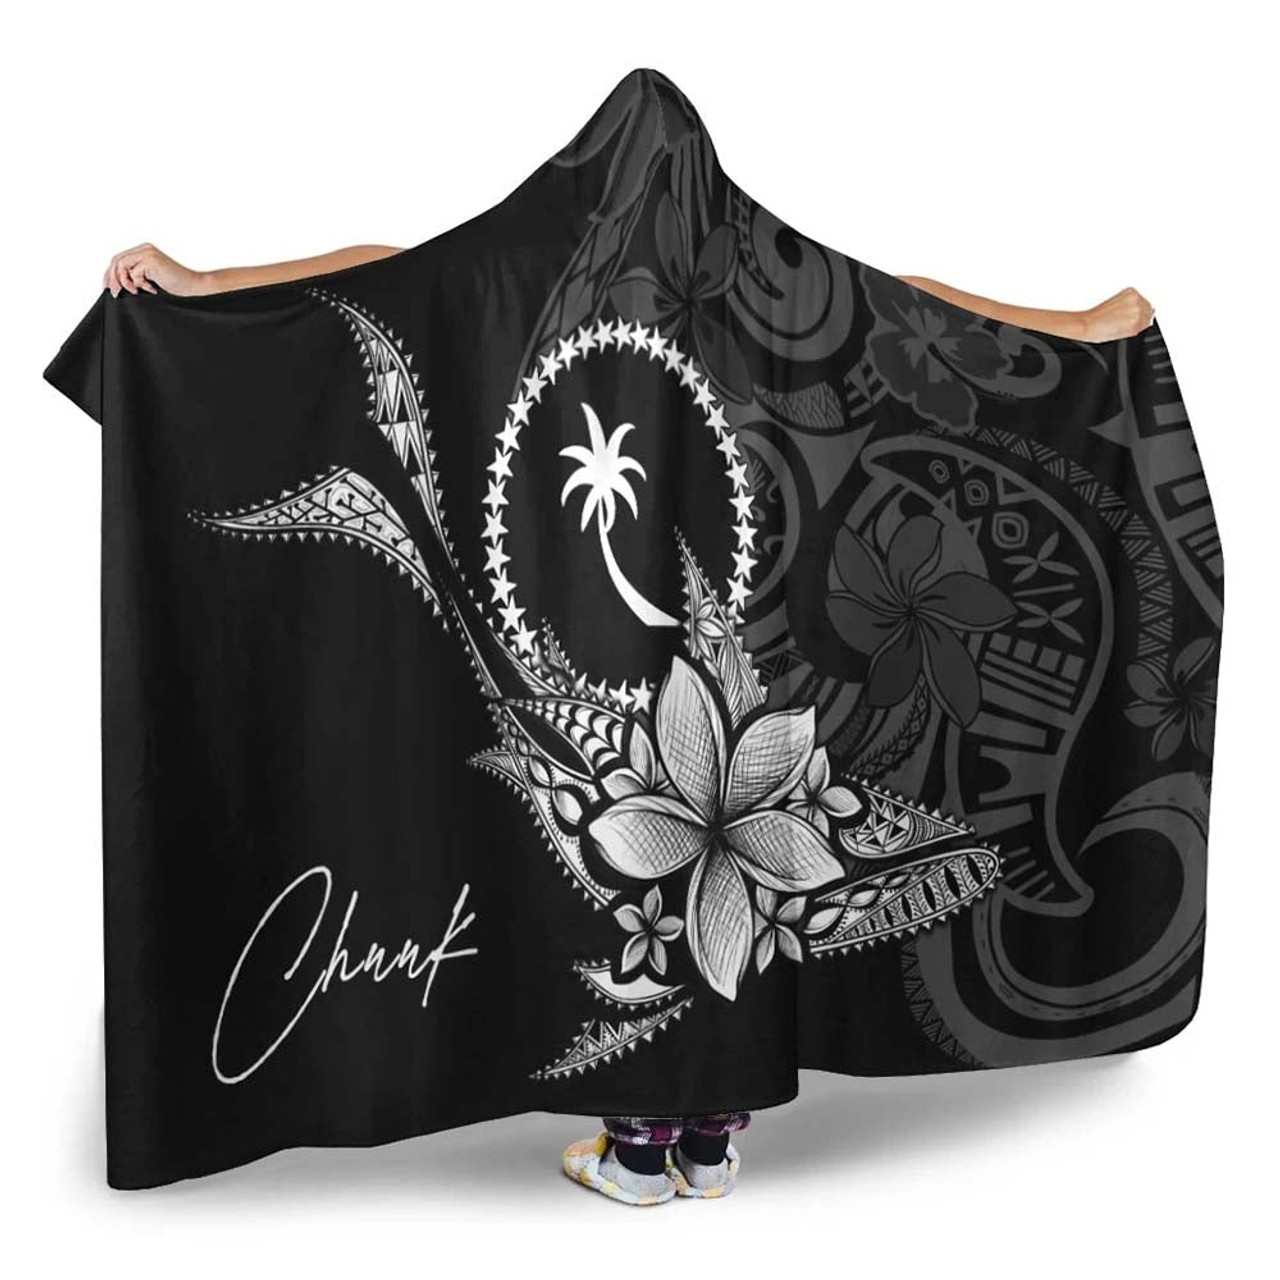 Chuuk State Hooded Blanket - Fish With Plumeria Flowers Style 2